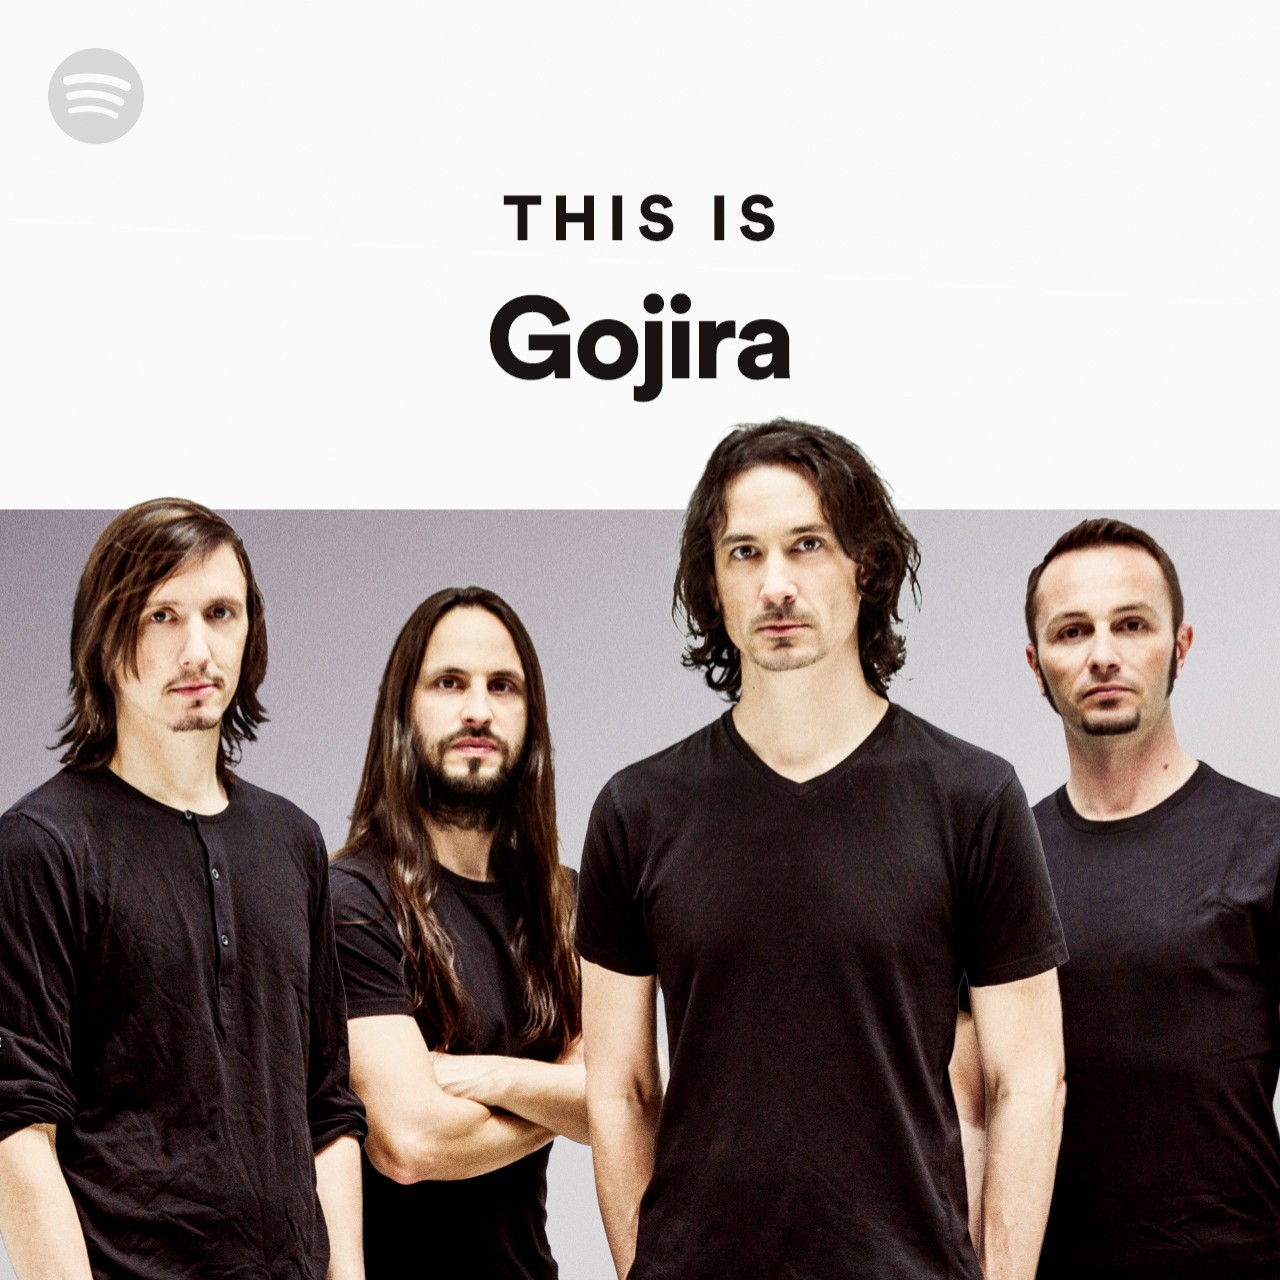 This Is Gojira